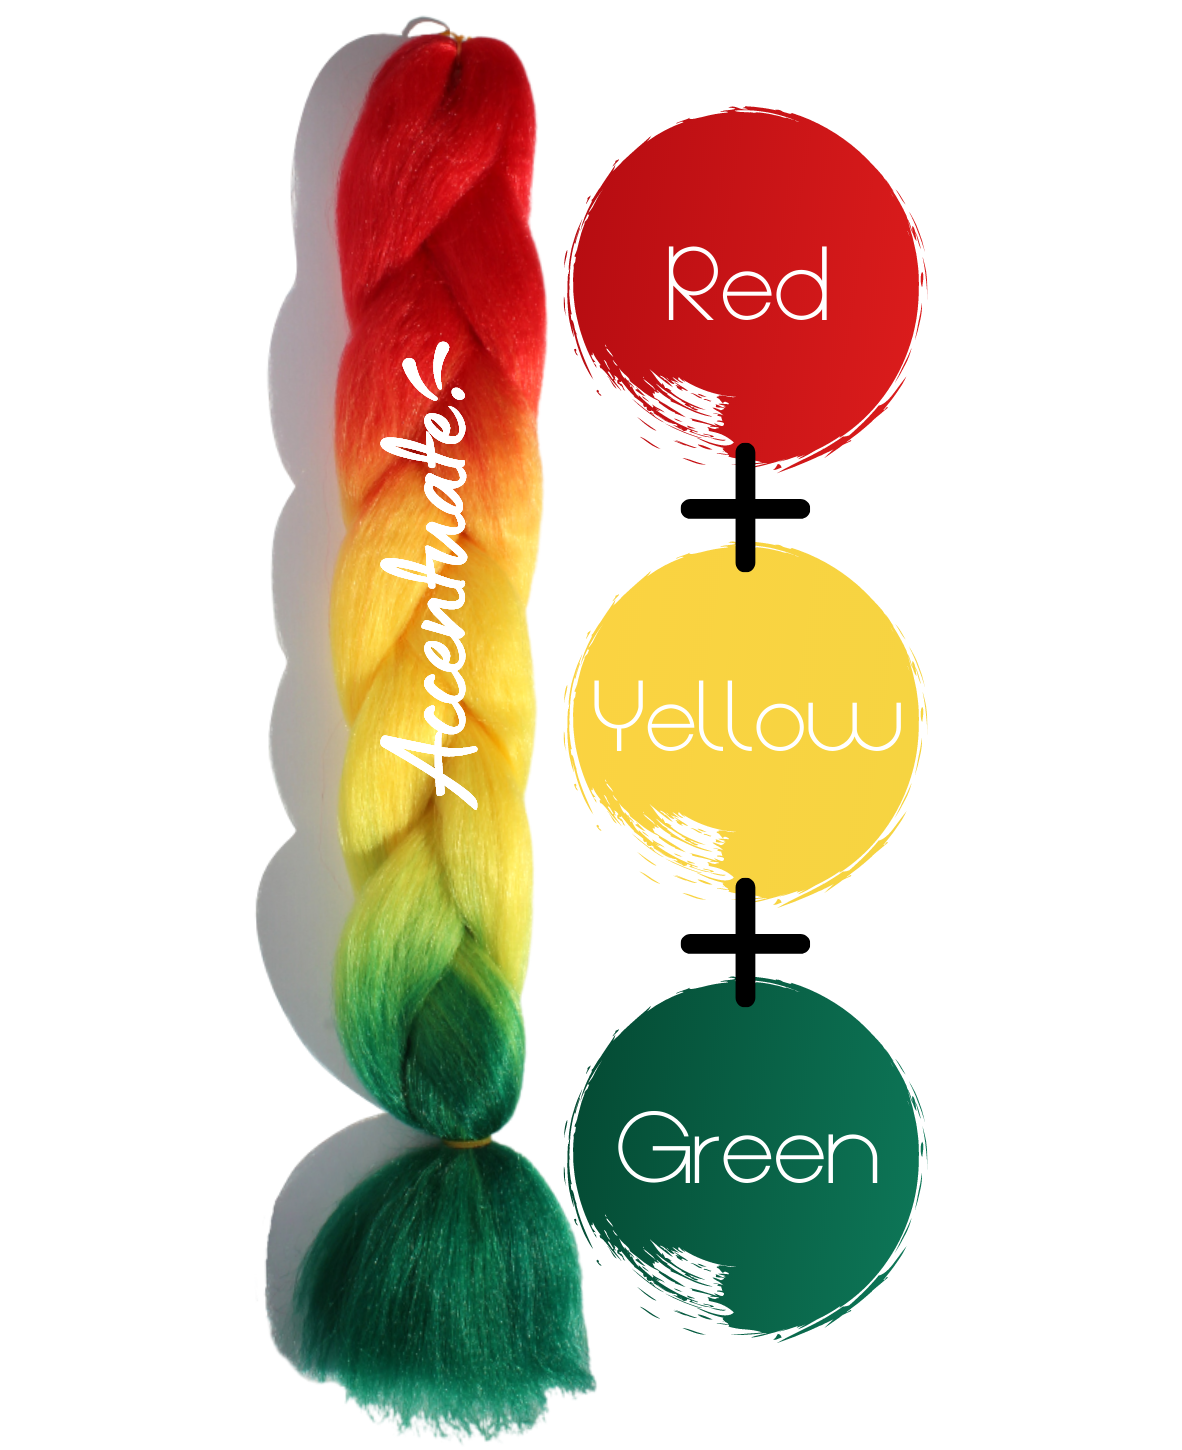 24" Red + Yellow + Green Ombré Jumbo Braid Hair Extension